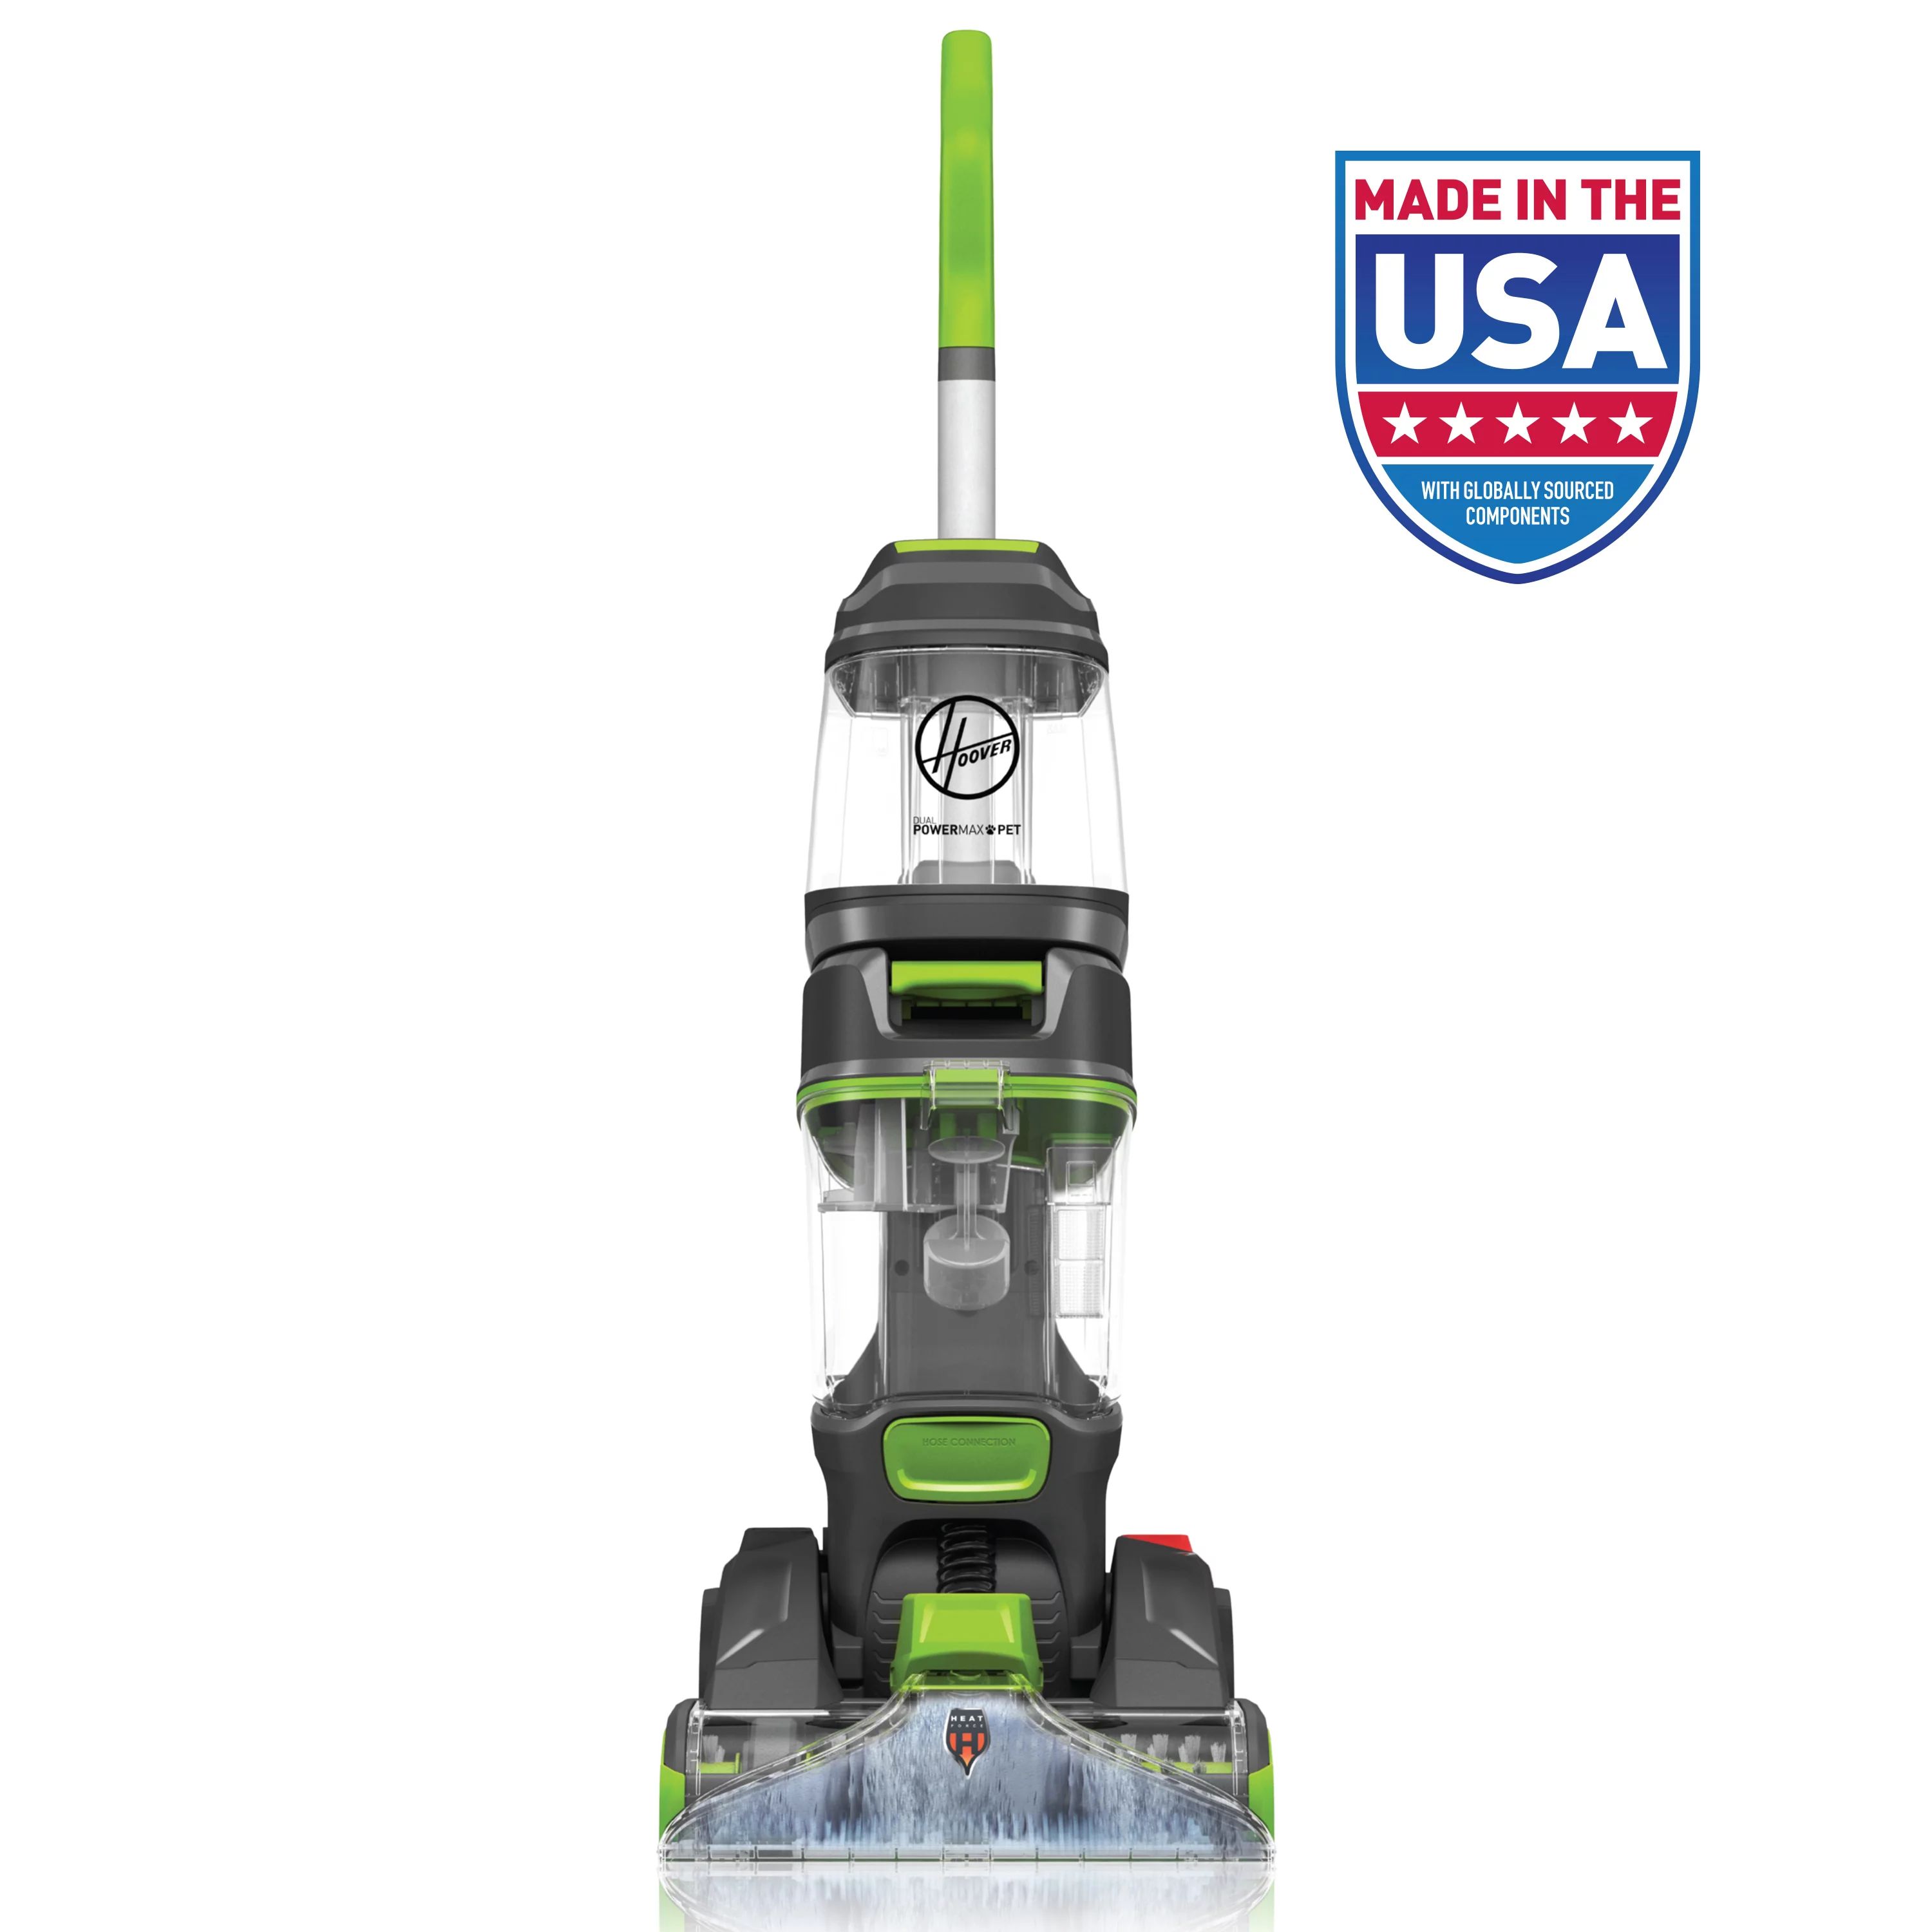 Hoover Dual Power Max Pet Upright Carpet Cleaner Machine with Dual Spin Power Brushes, FH54011 | Walmart (US)